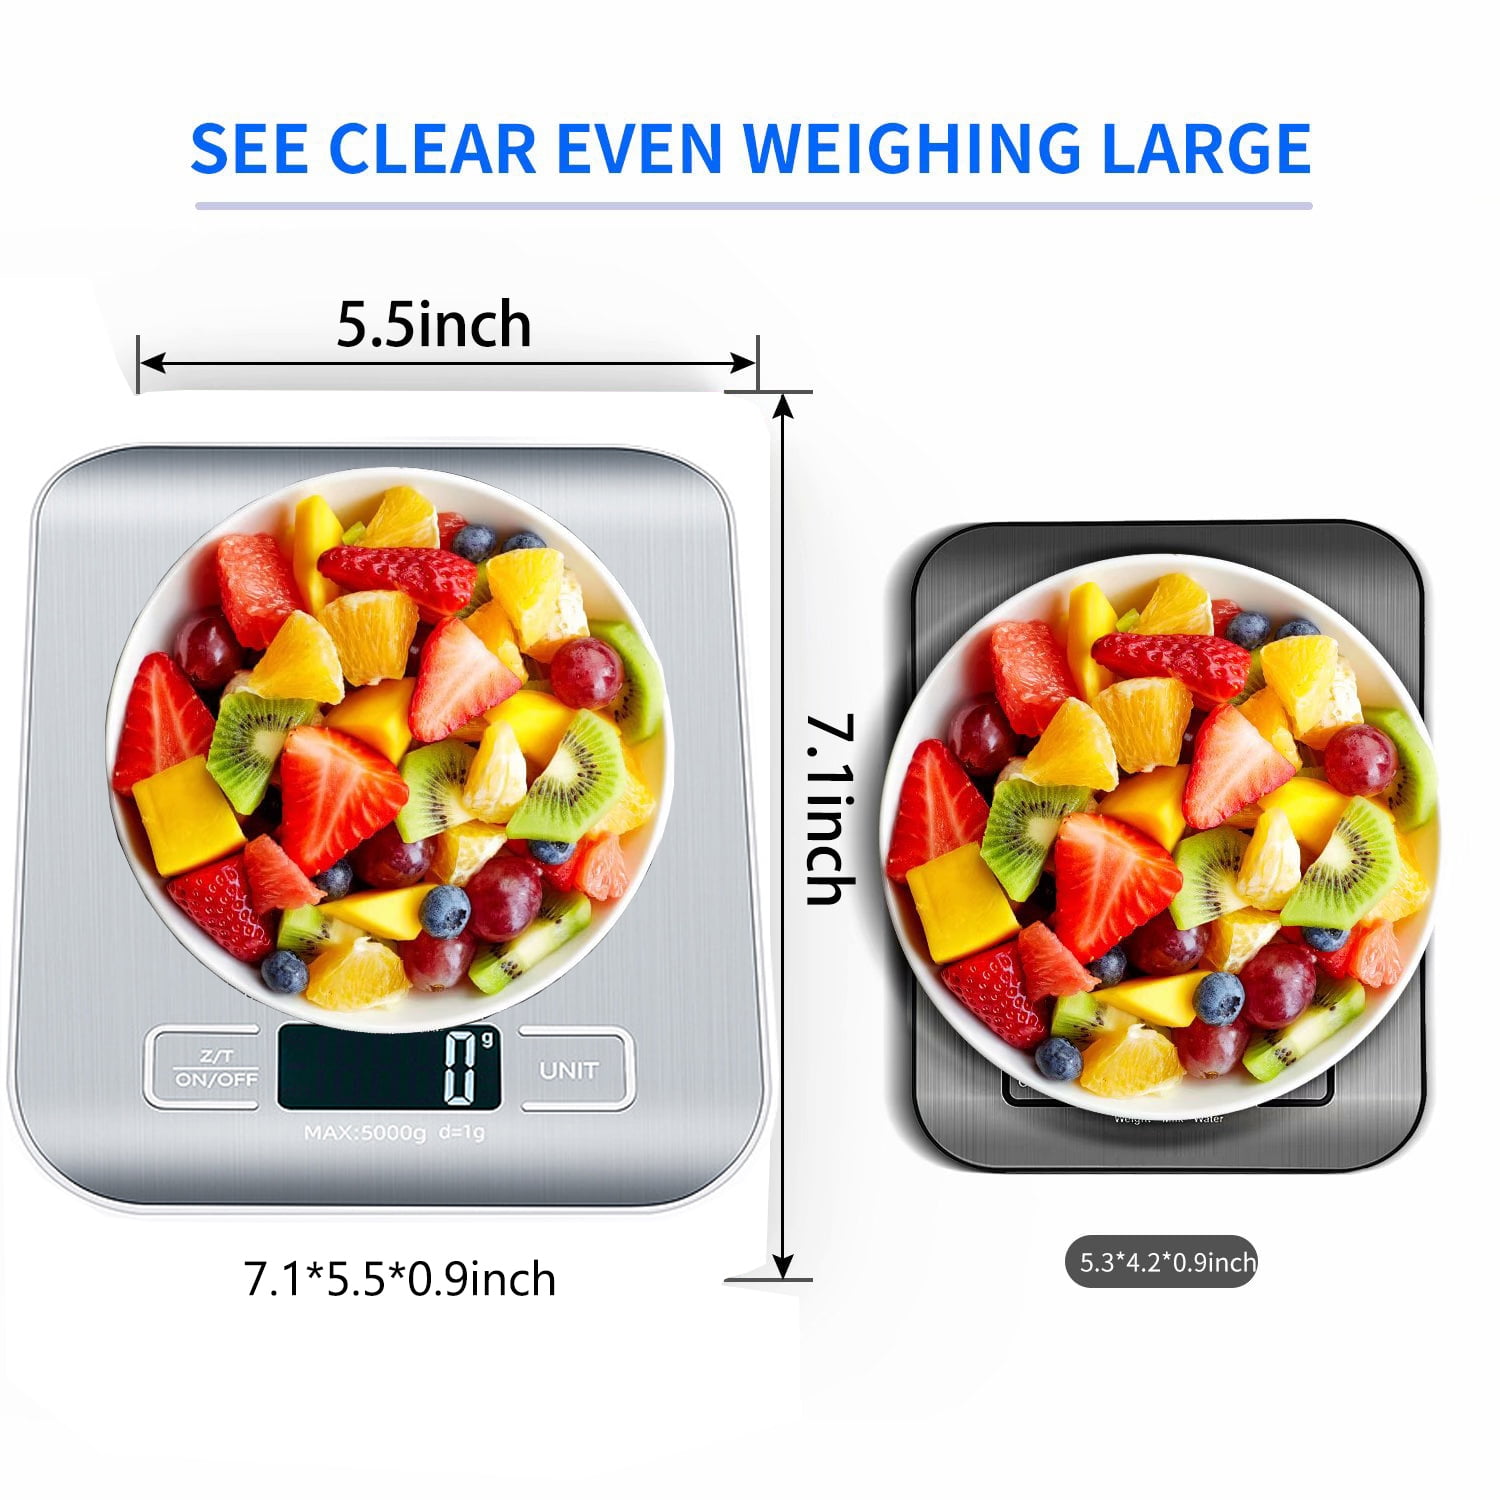 Kitchen Scale, 5 Unit Conversions (g,kg,lb:oz,fl.oz,ml) Food Scale Digital  Weight Grams And Oz, Kitchen Scale For Cooking Baking, Precise Graduation,  Sleek Tempered Glass Platform Accurate Digital Led Display (battery Not  Included) 